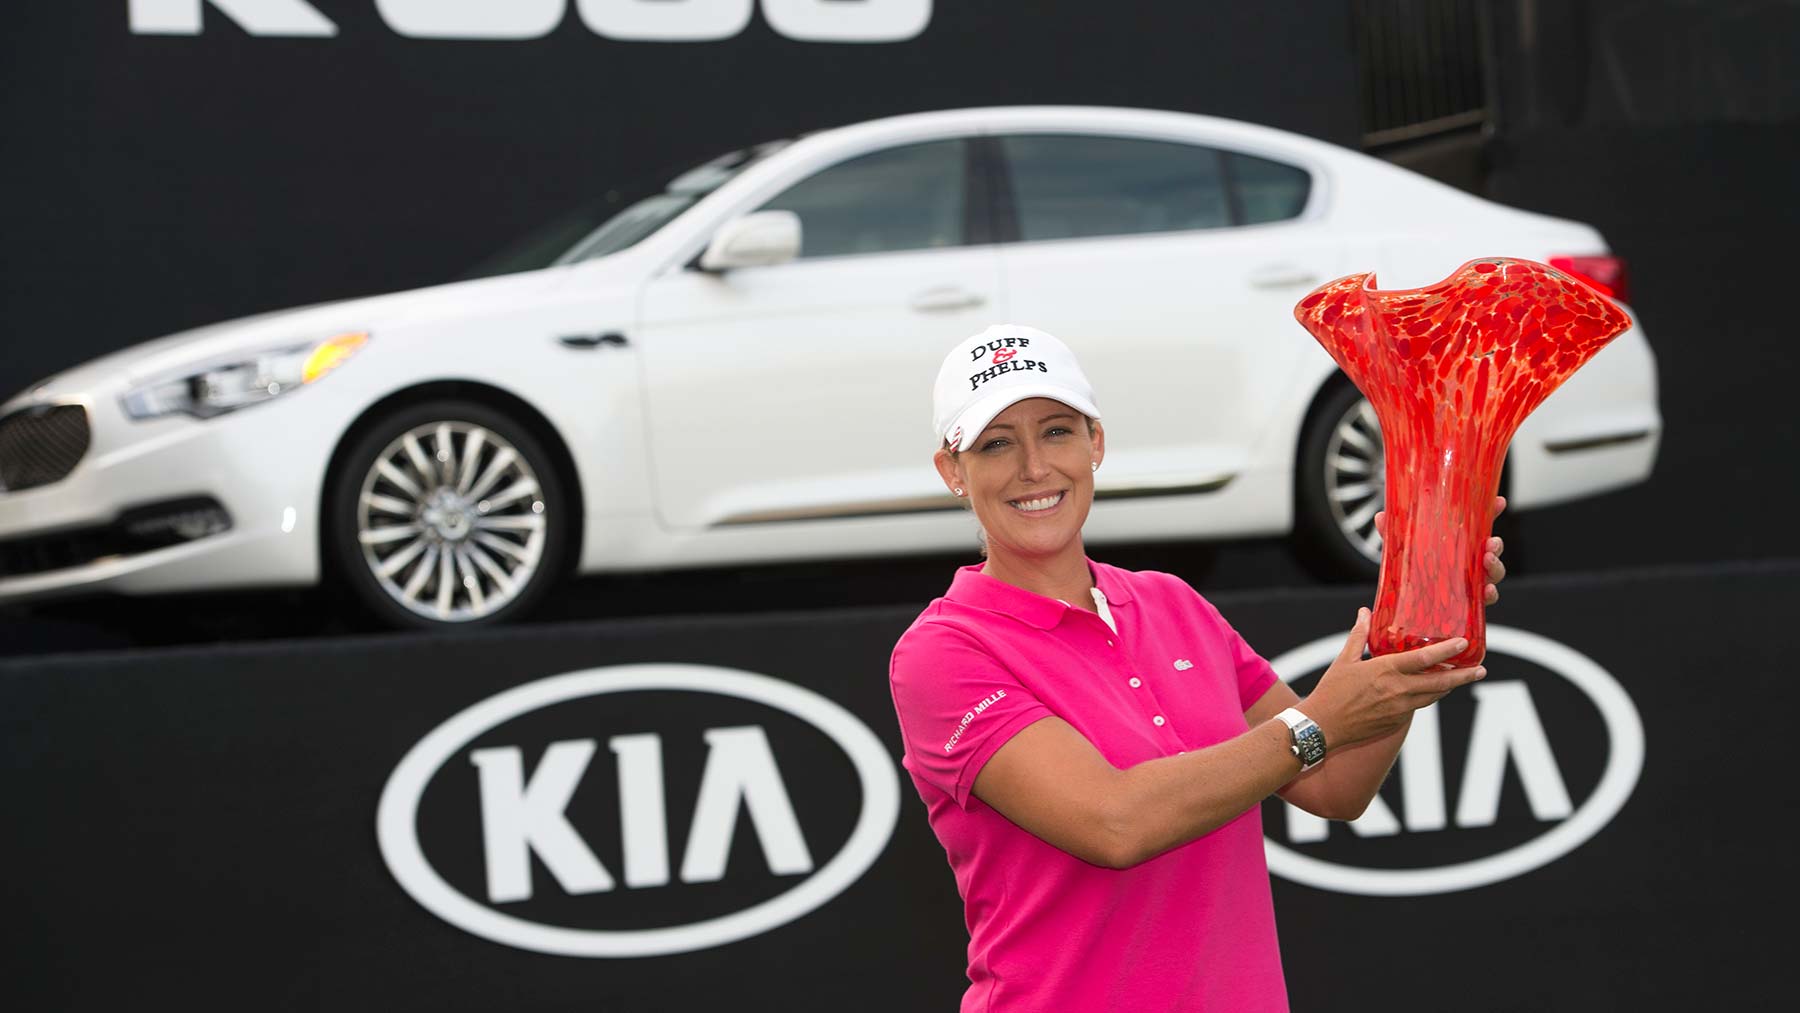 Cristie Kerr with the Kia Classic Trophy in front of the Kia K900